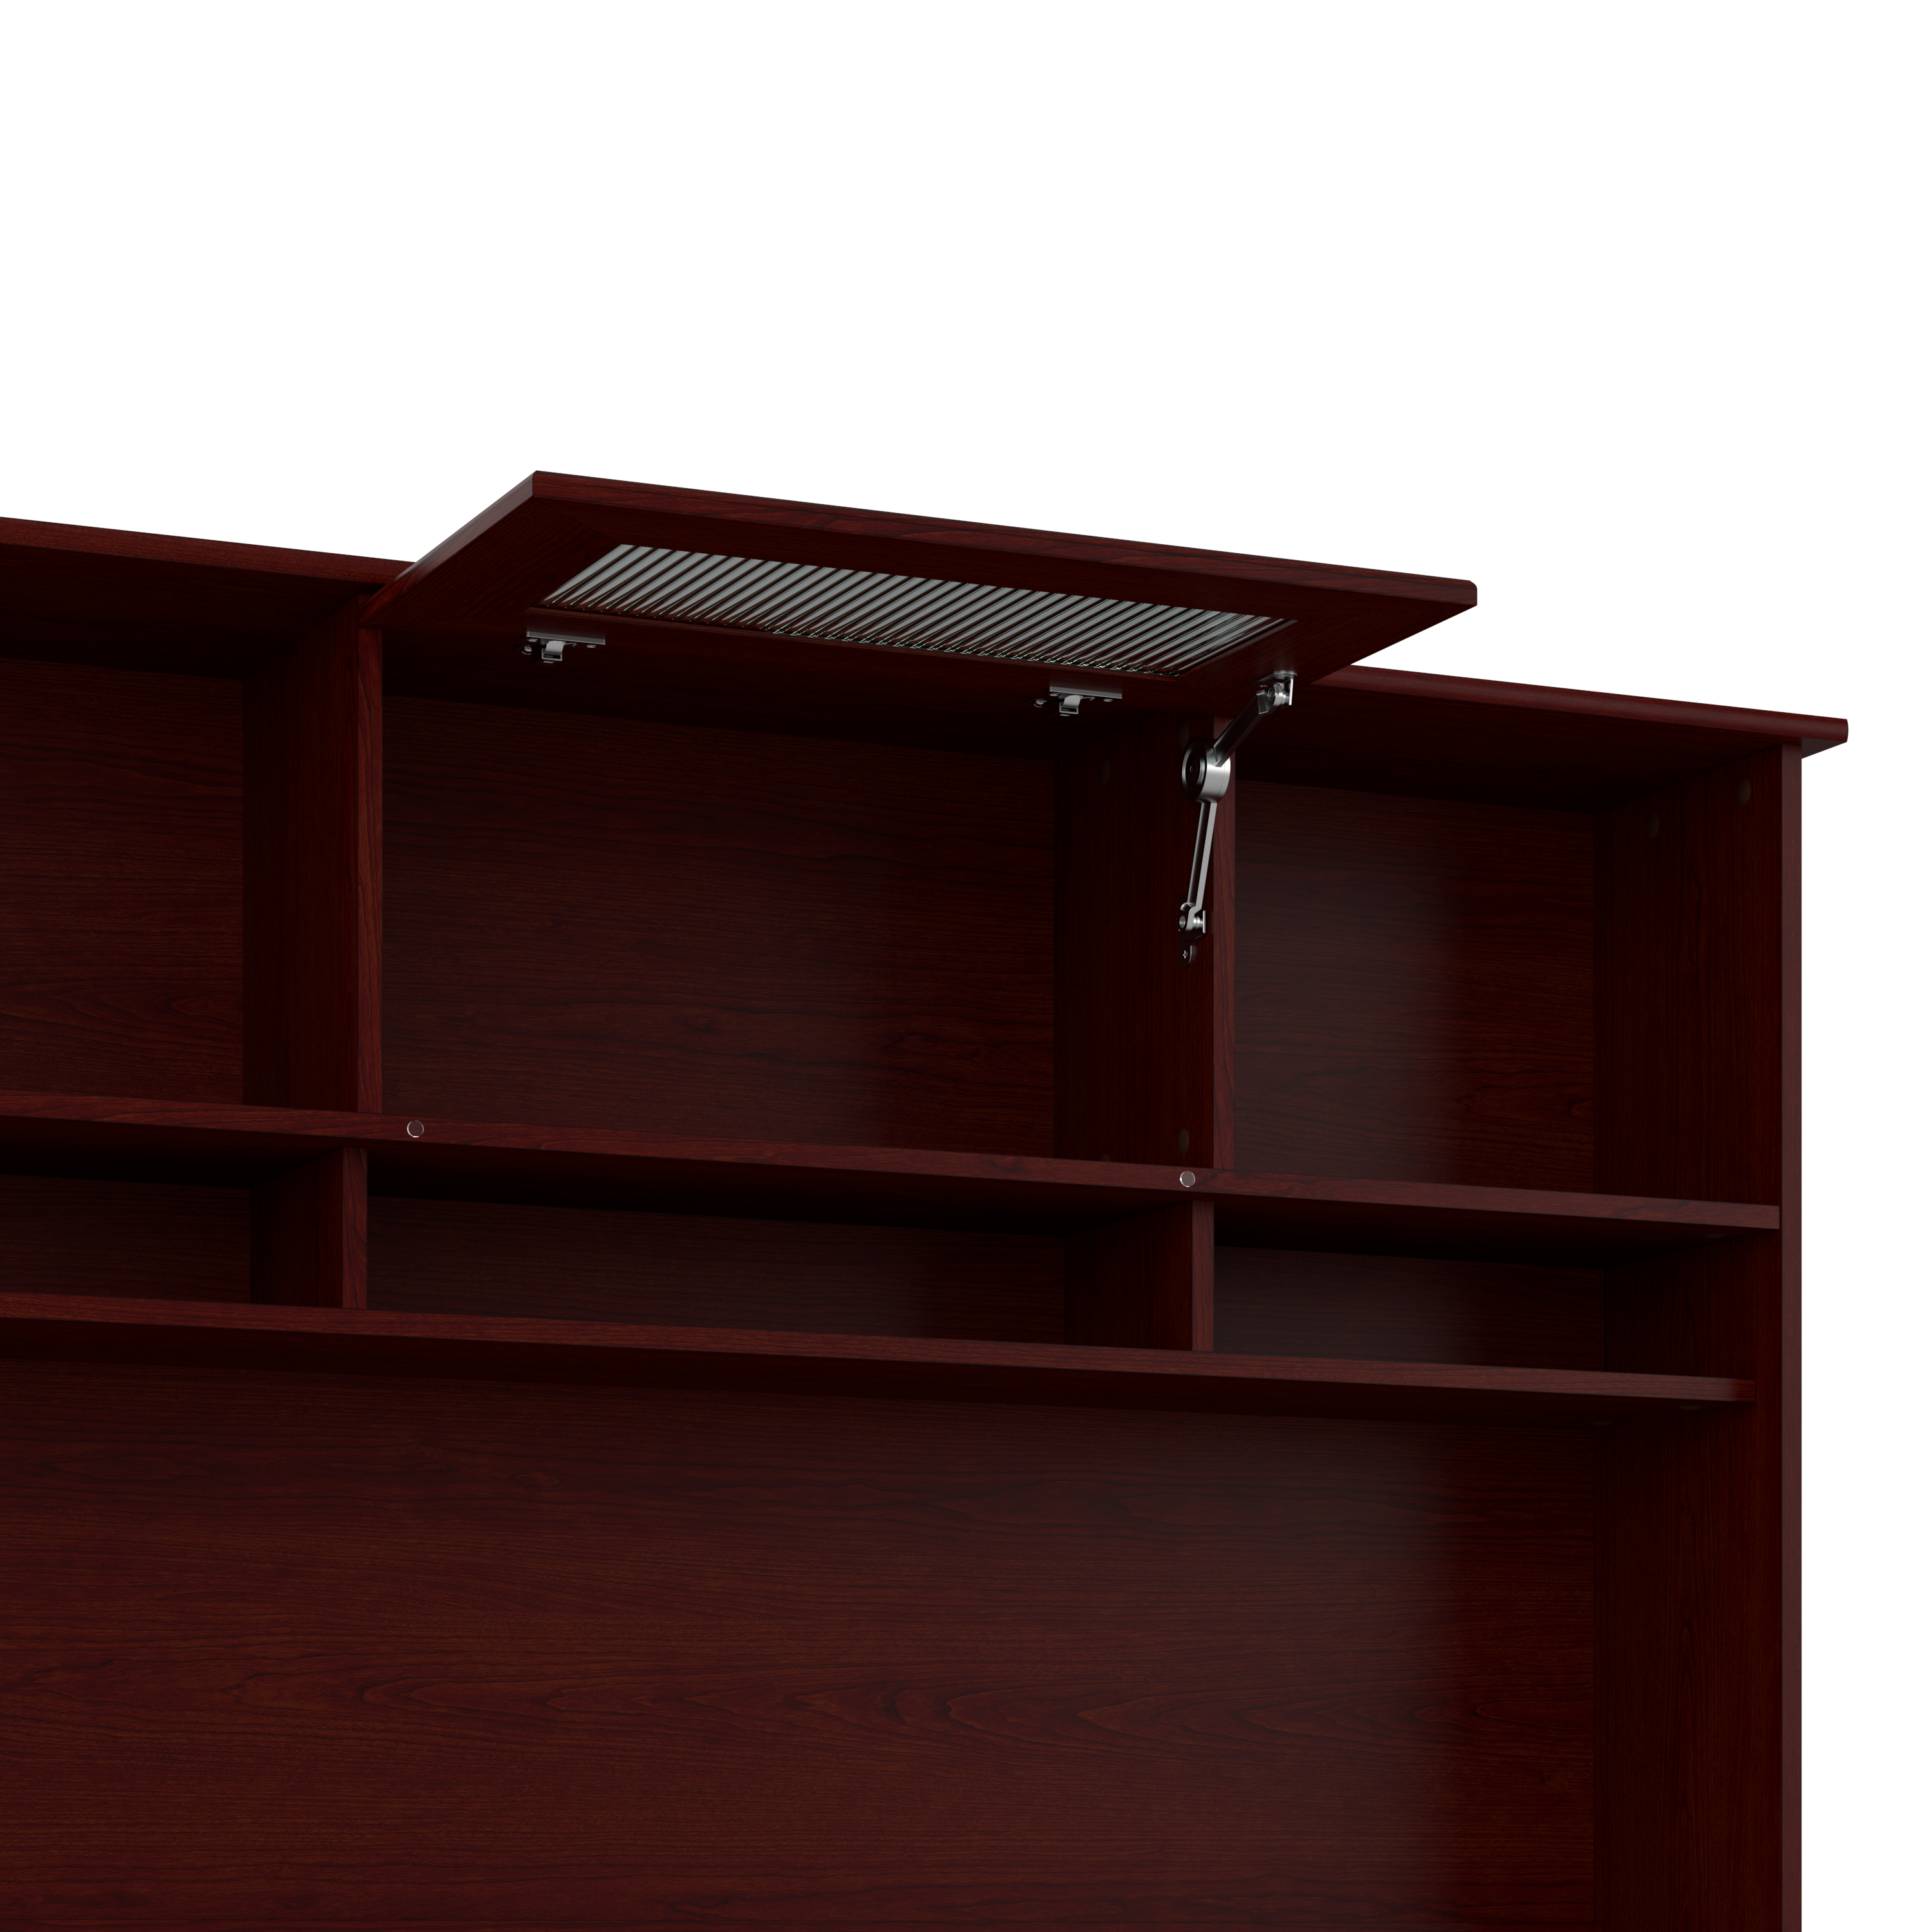 Shop Bush Furniture Cabot 60W L Shaped Computer Desk with Hutch and Drawers 03 CAB046HVC #color_harvest cherry